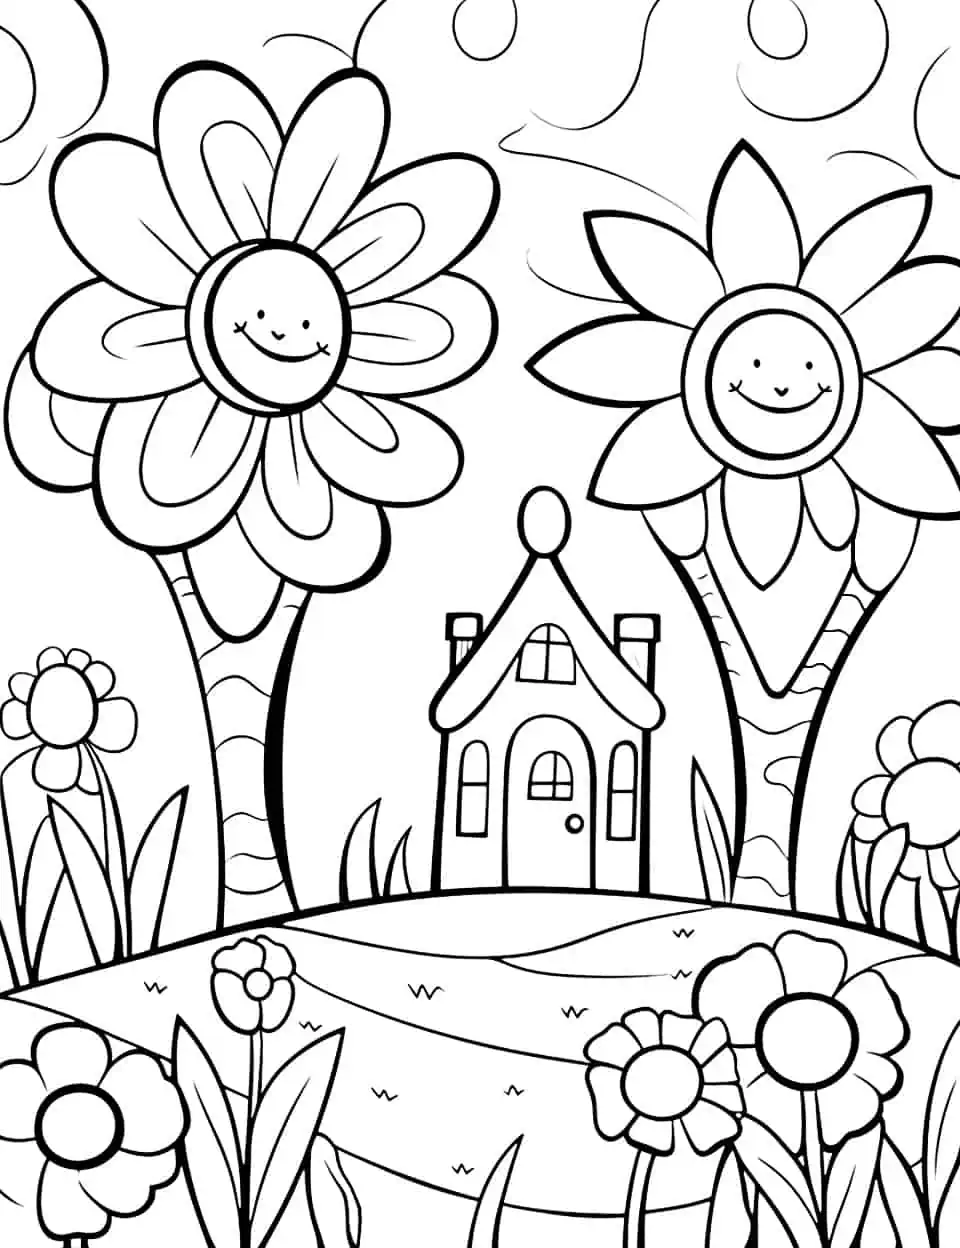 Doodle Art Alley in Spring Coloring Page - A complex, spring-themed doodle art alley-style page for older kids to color.